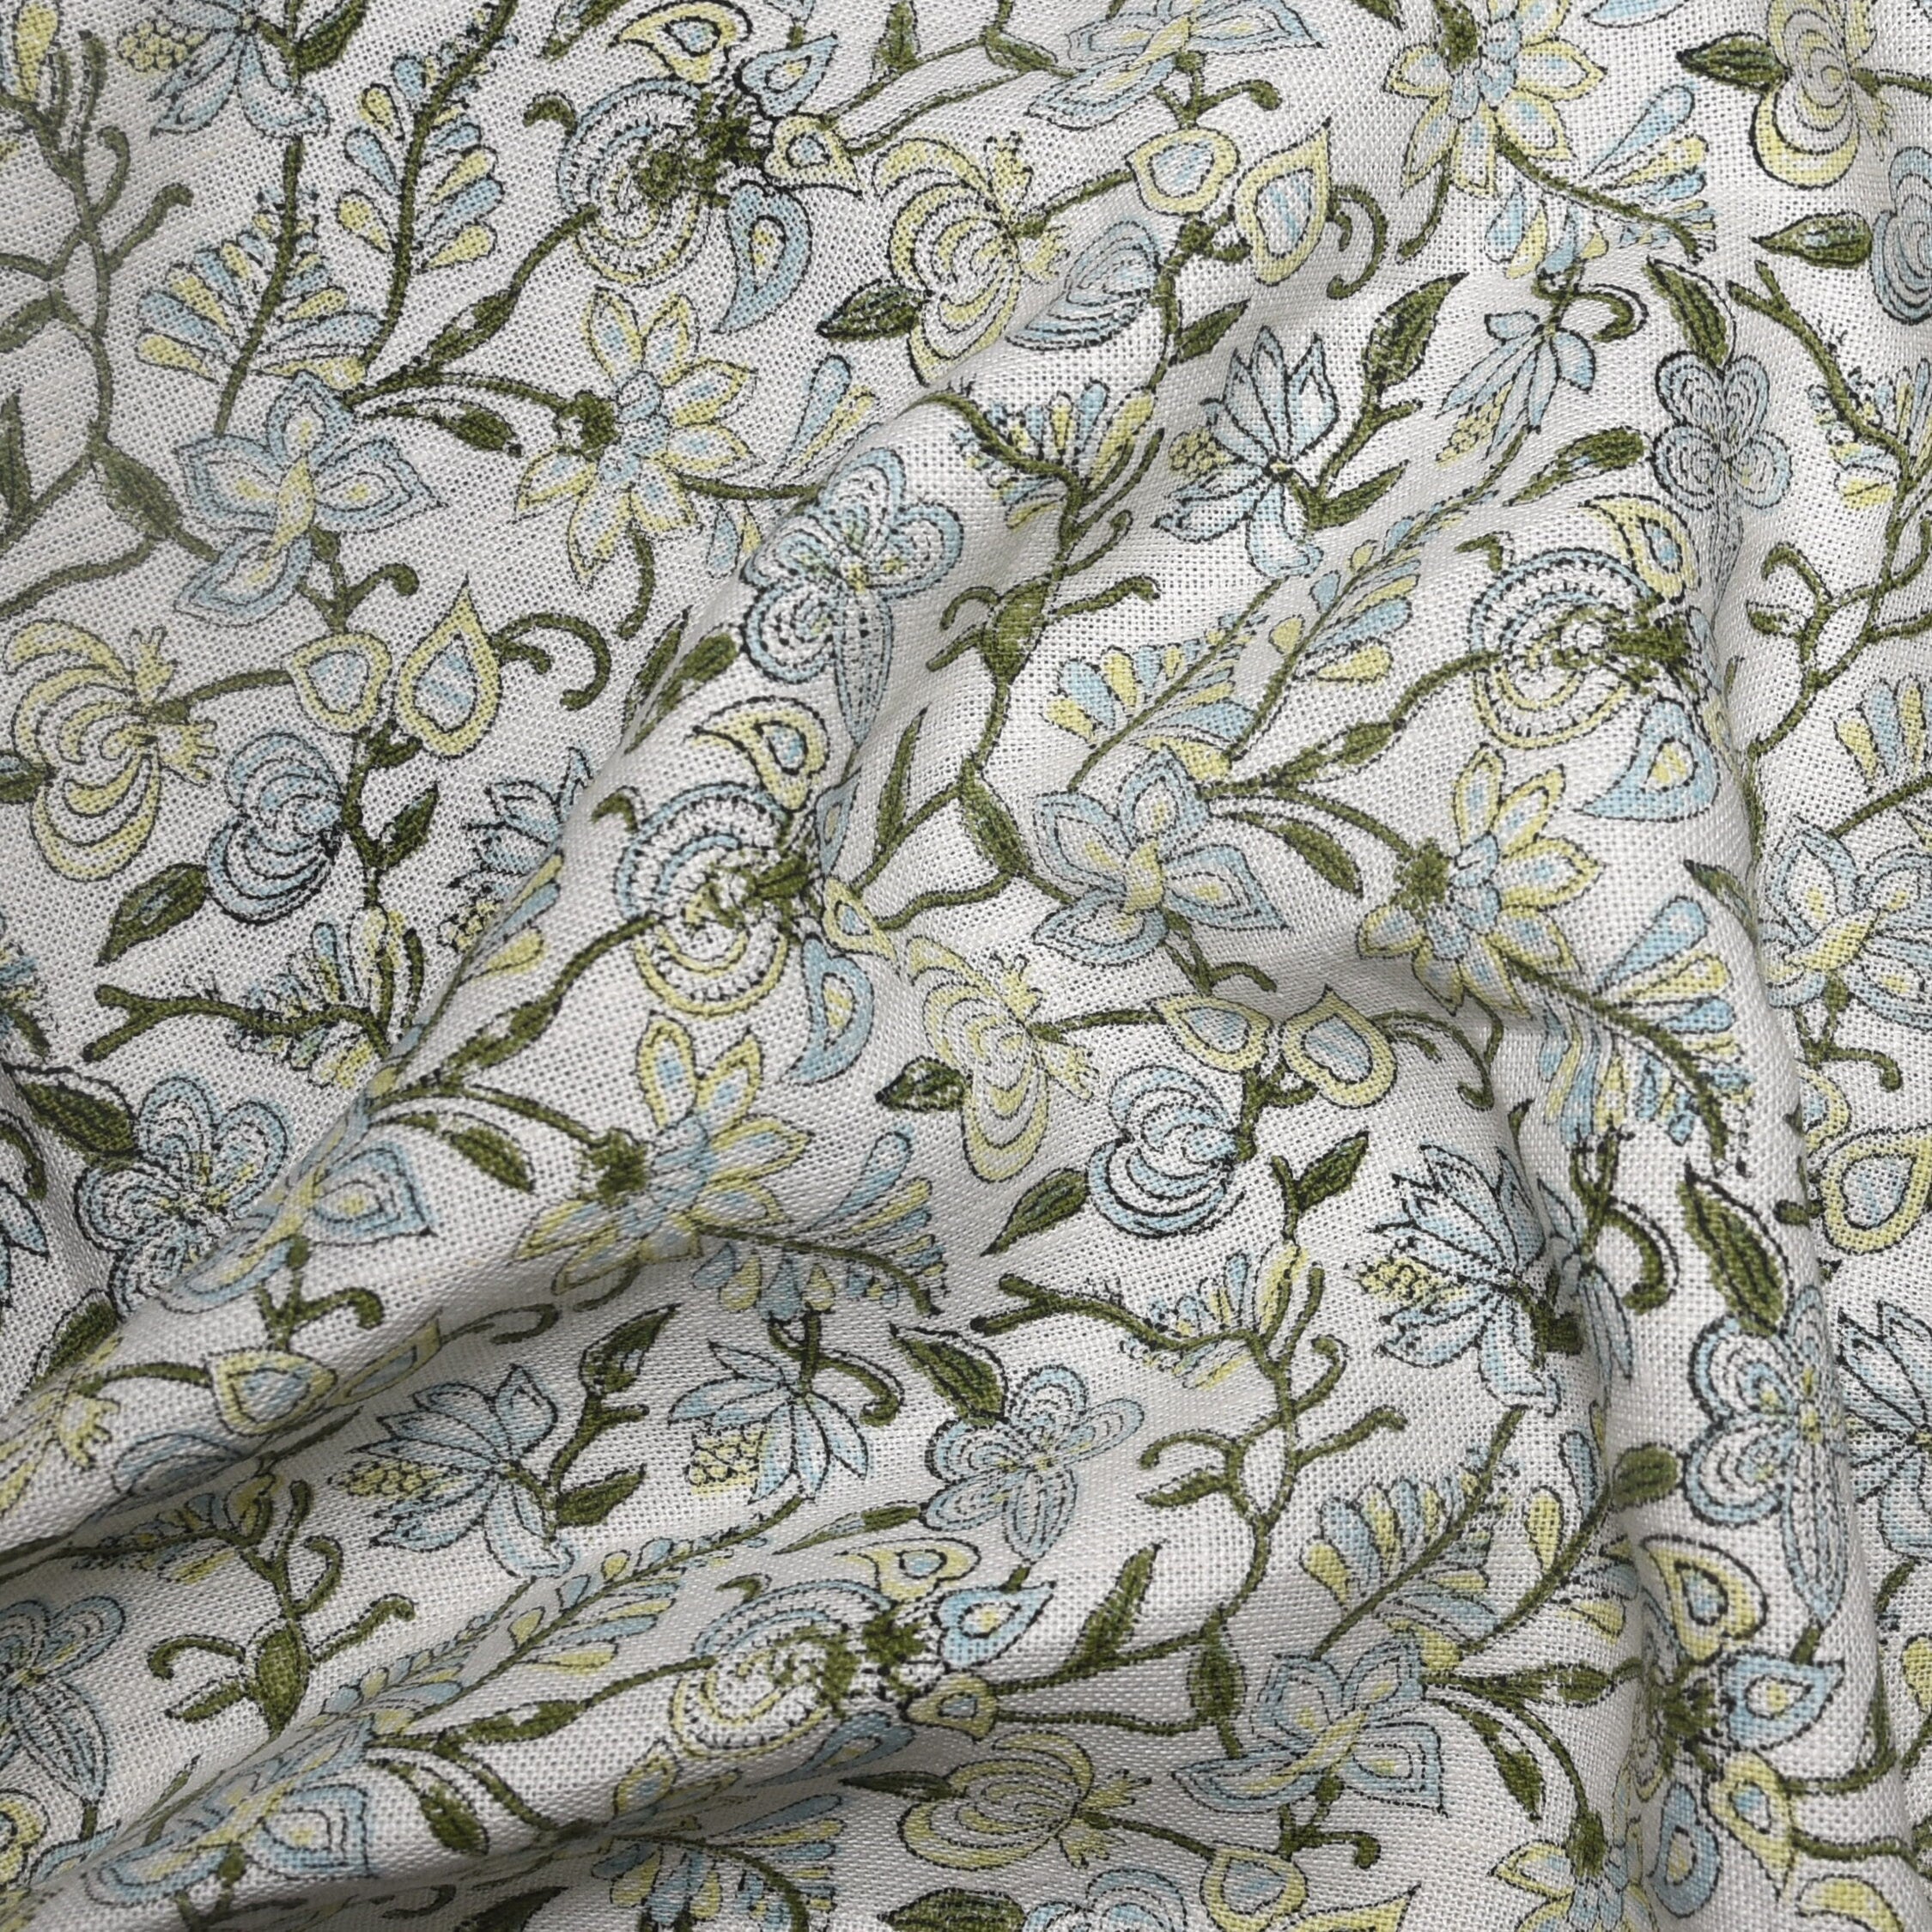 Jamnotri Thick Linen  Most Popular Block Print Fabric In Summers  Best For Upholstery,Cushion Cover,Sofa/Chair Cover And Other Crafts